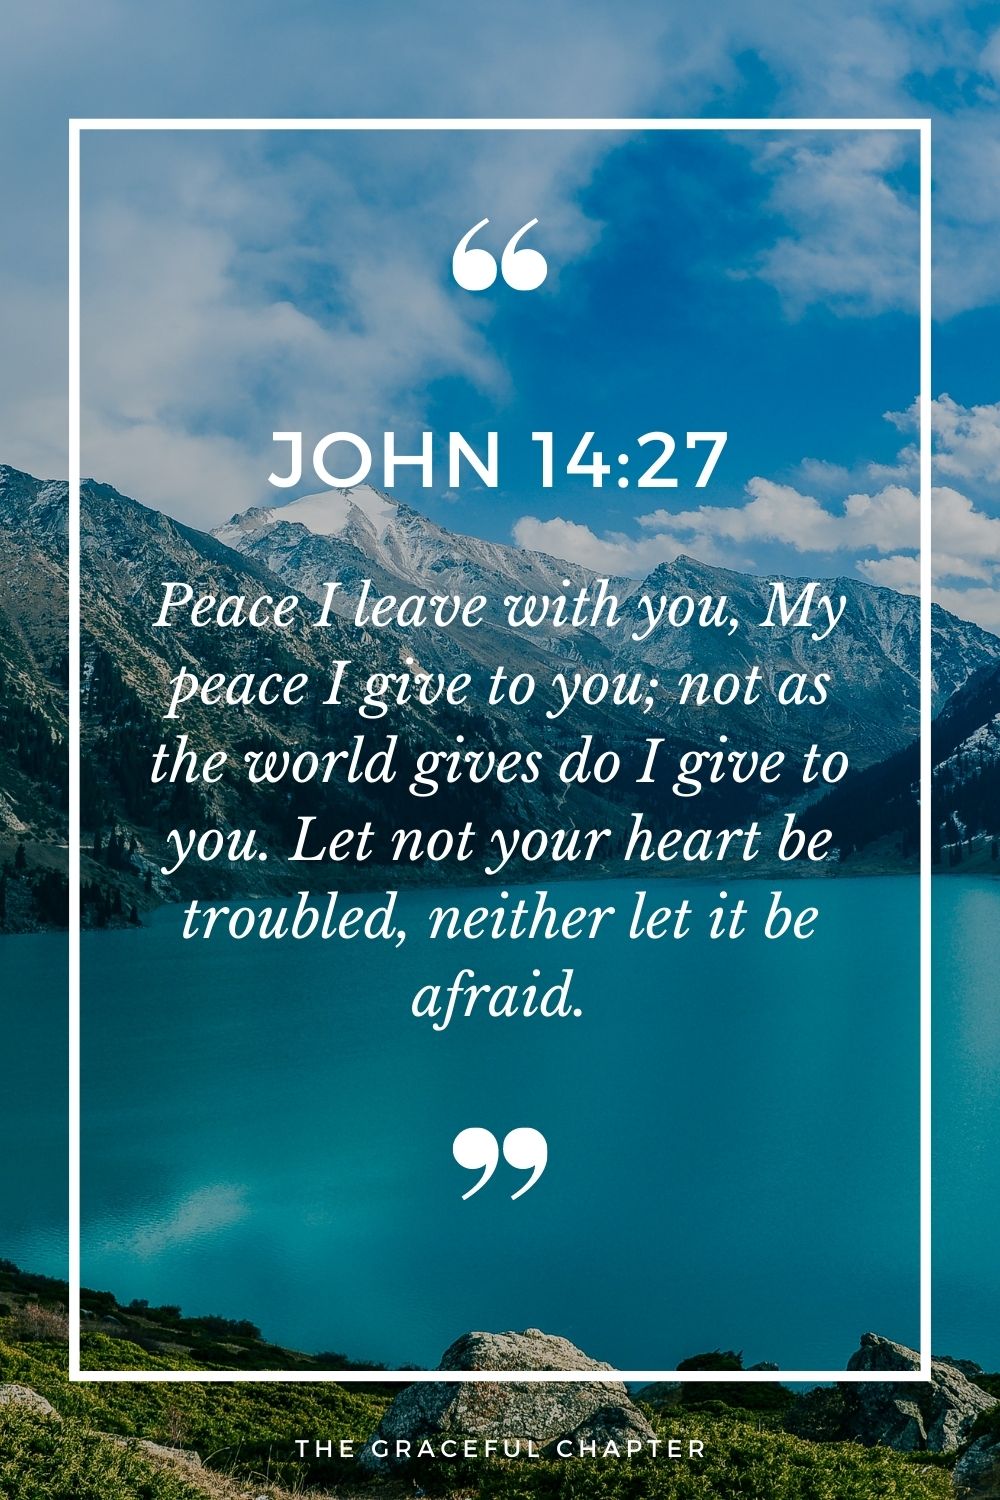 Peace I leave with you, My peace I give to you; not as the world gives do I give to you. Let not your heart be troubled, neither let it be afraid. John 14:27